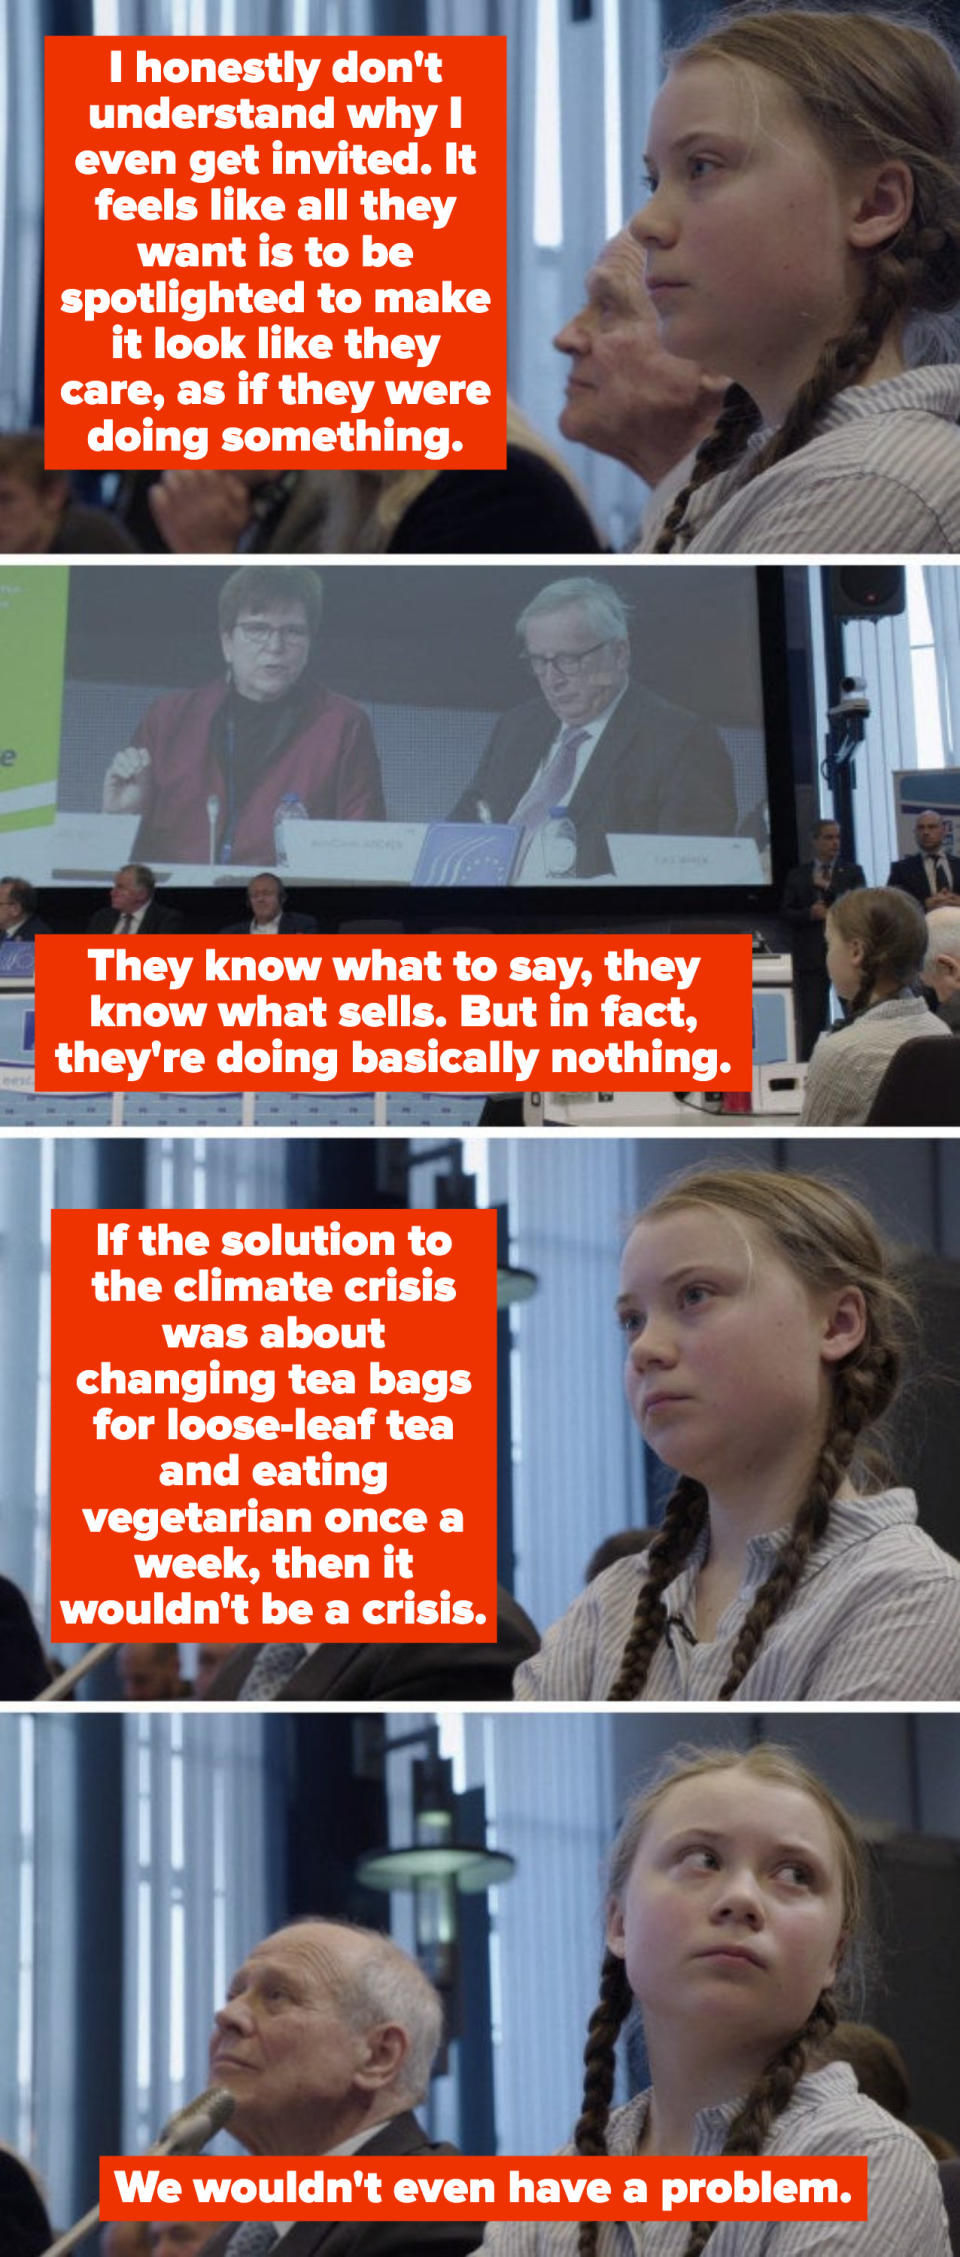 Greta Thunberg describing her frustration with politicians' activism about the climate crisis, saying: "If the solution to the climate crisis was about changing tea bags for loose-leaf tea and eating vegetarian once a week, then it wouldn't be a crisis"